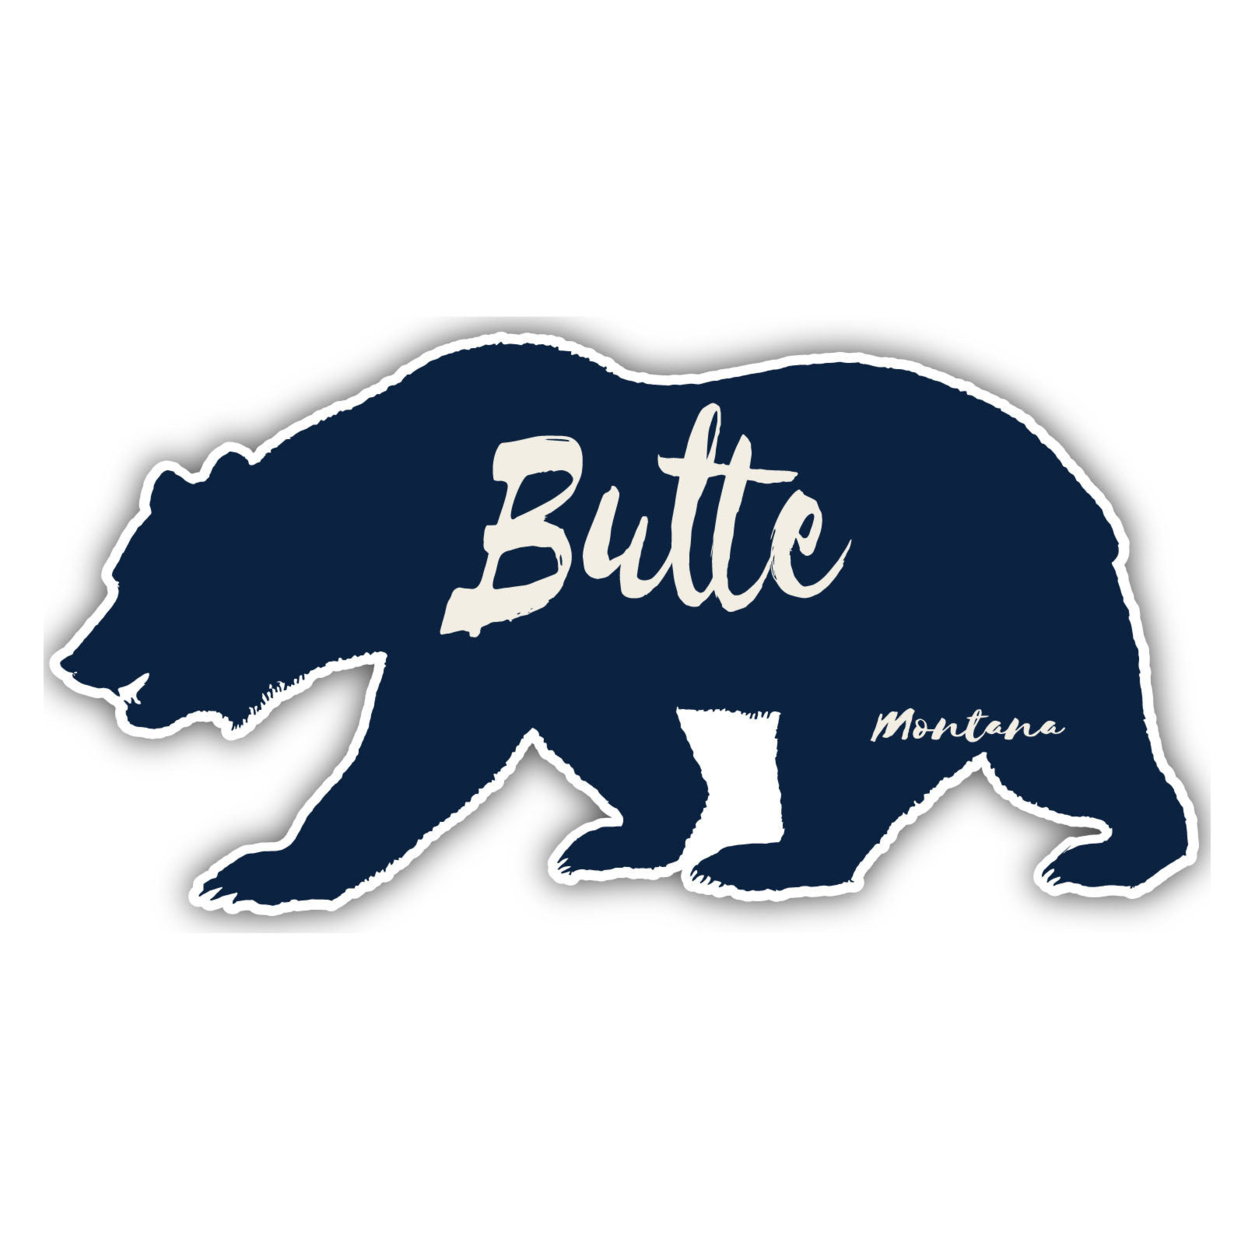 Butte Montana Souvenir Decorative Stickers (Choose Theme And Size) - 4-Pack, 4-Inch, Tent